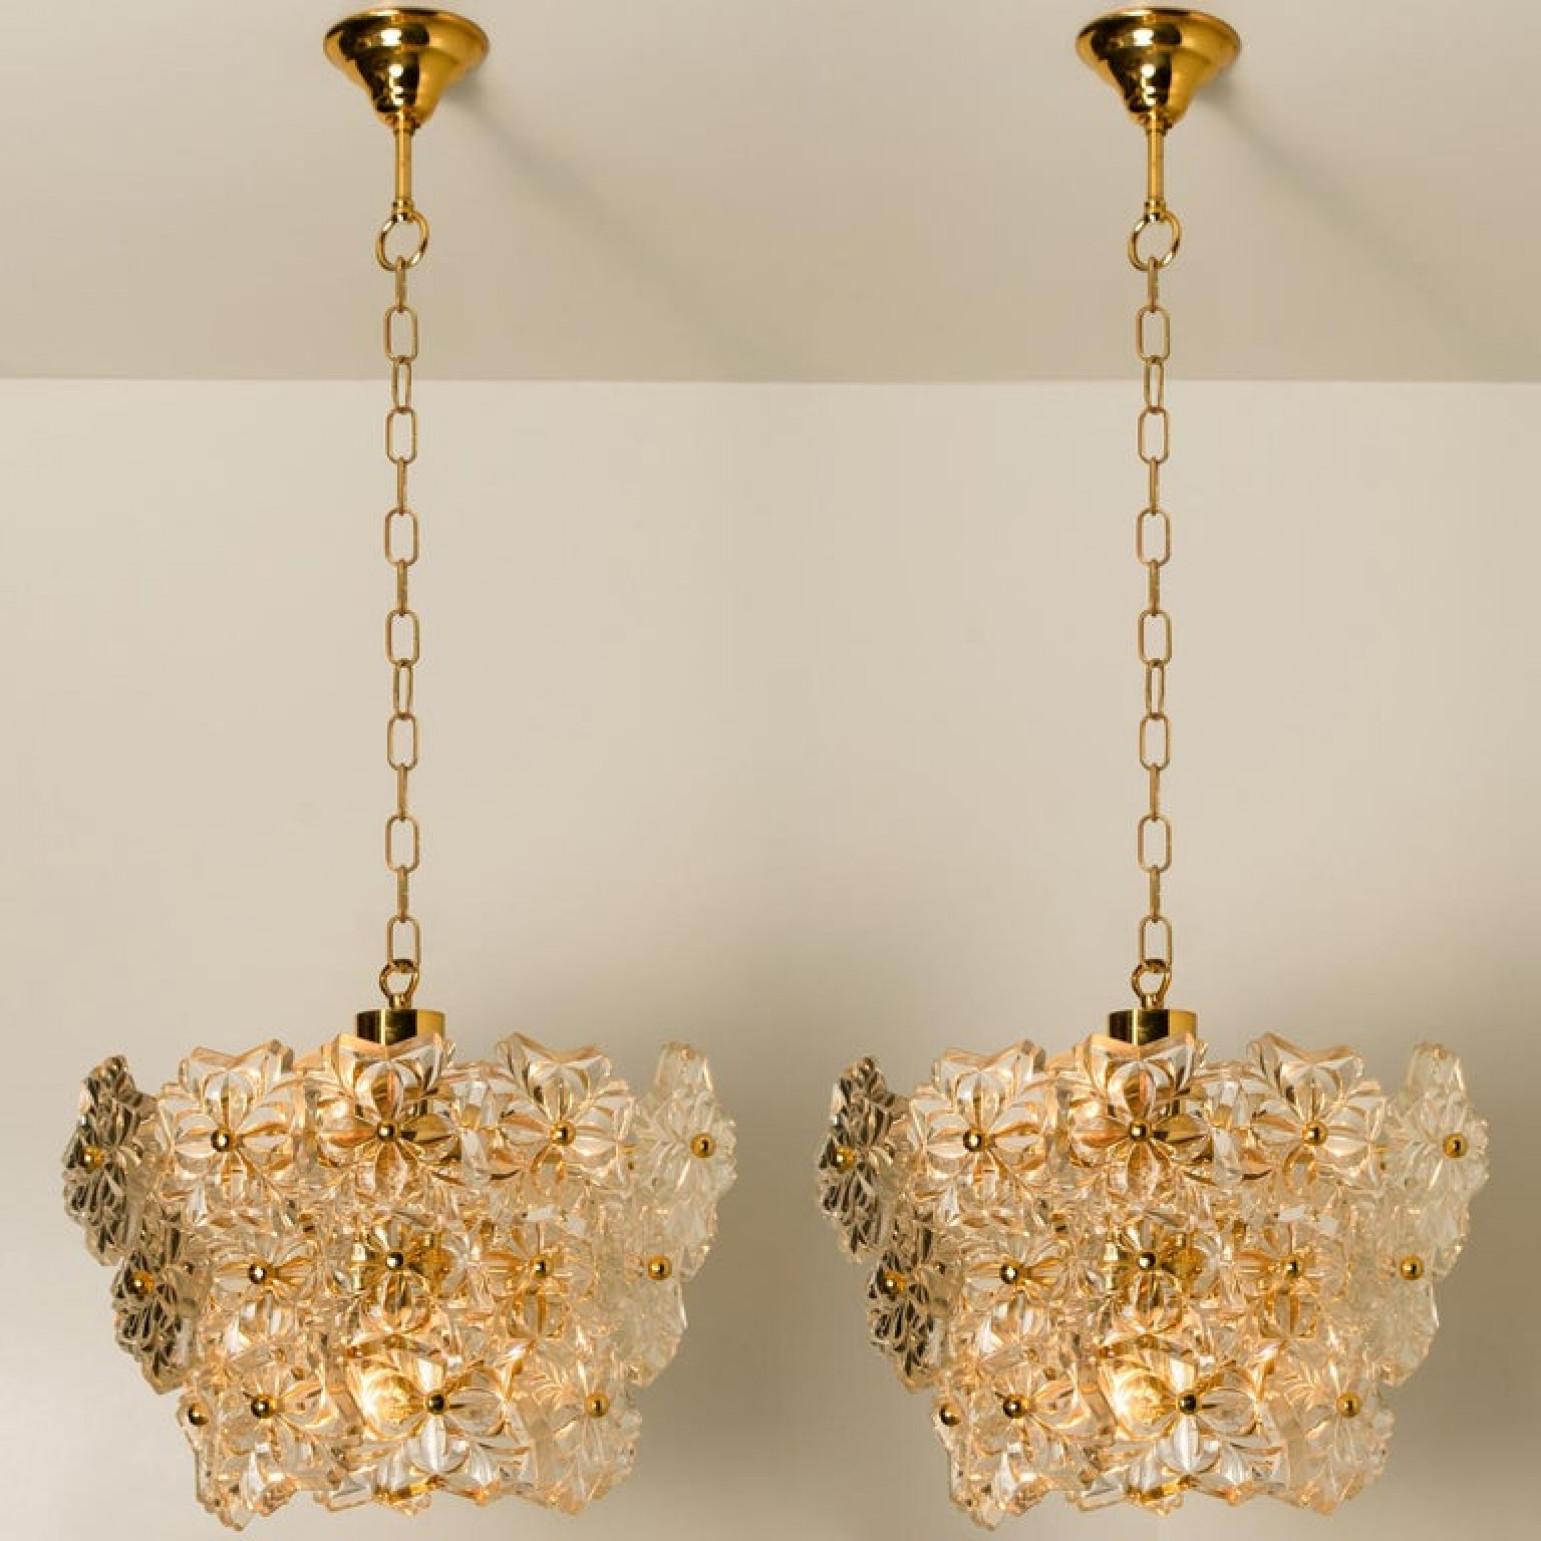 Mid-Century Modern Pair of Glass and Brass Floral Three Tiers Light Fixture from Hillebrand, 1970s For Sale